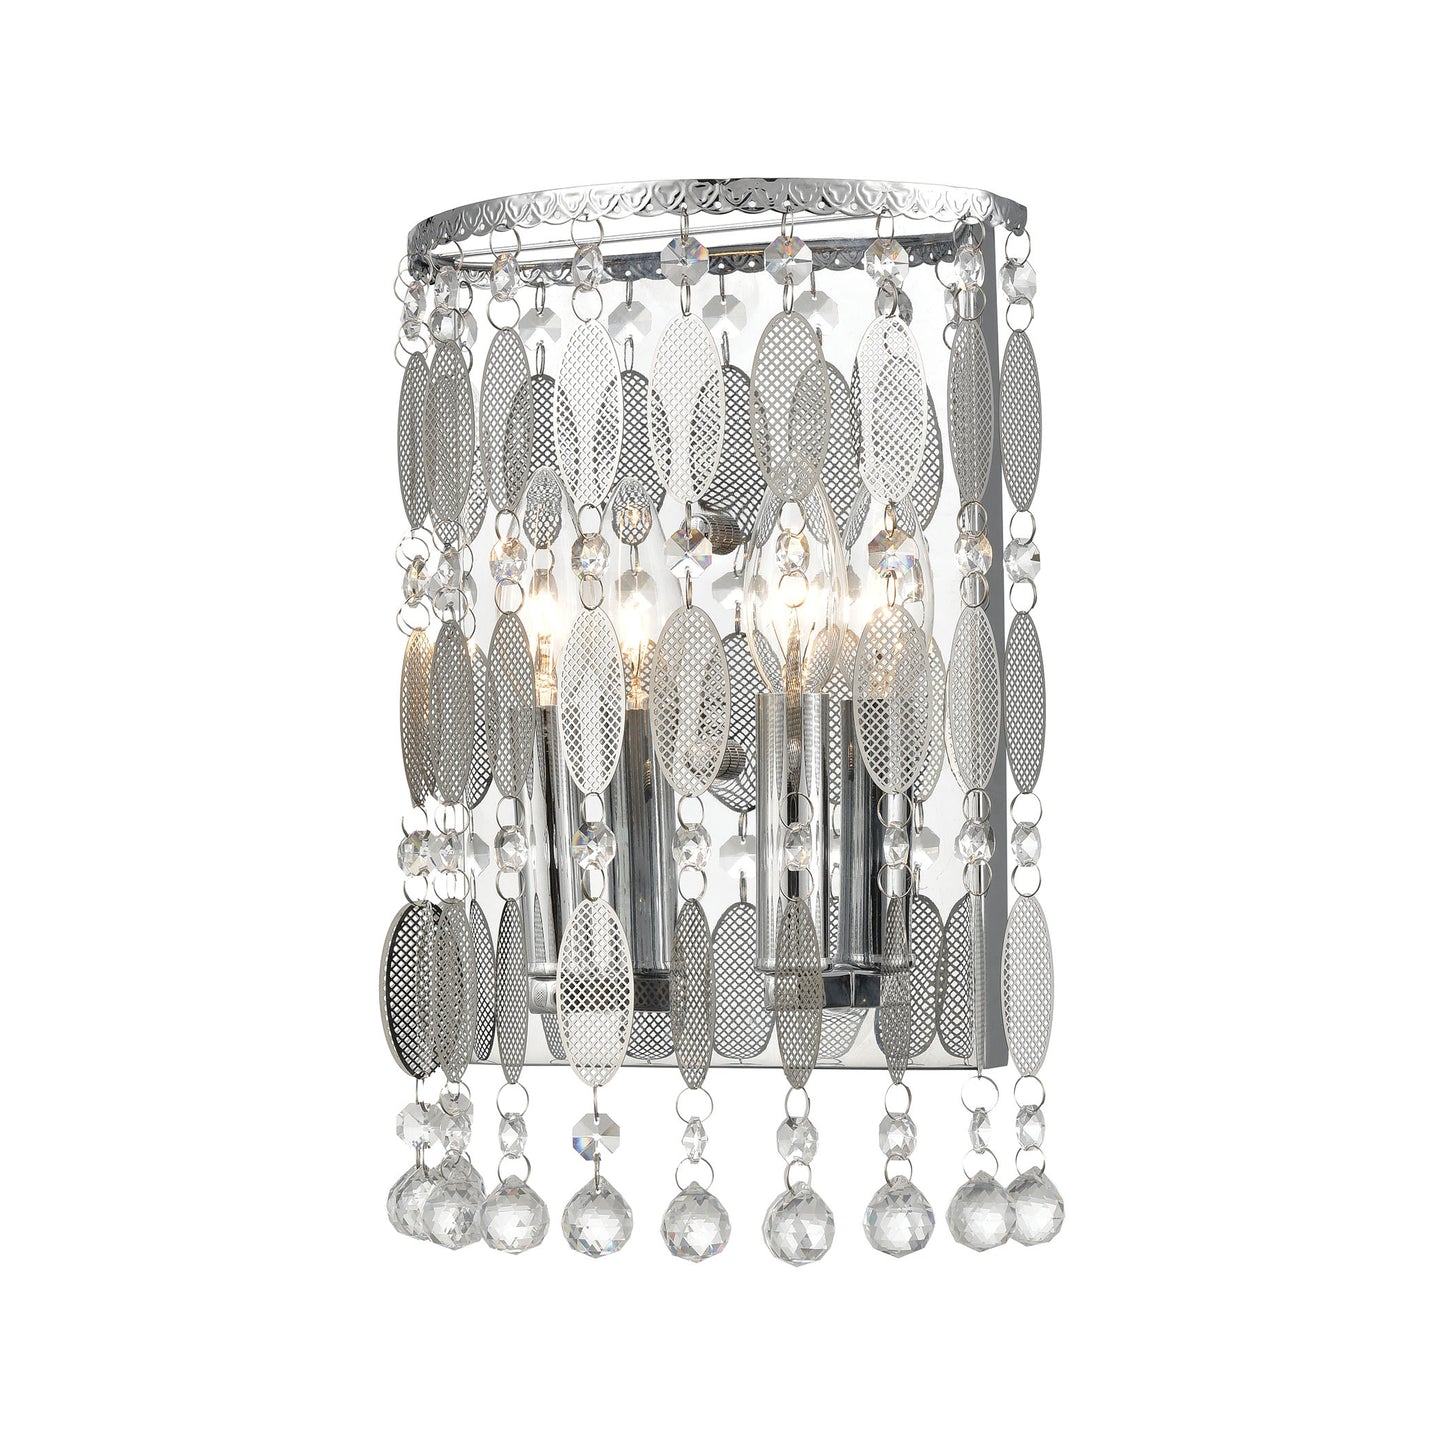 ELK Lighting 15380/2 - Chamelon 8" Wide 2-Light Sconce in Polished Chrome with Perforated Stainless